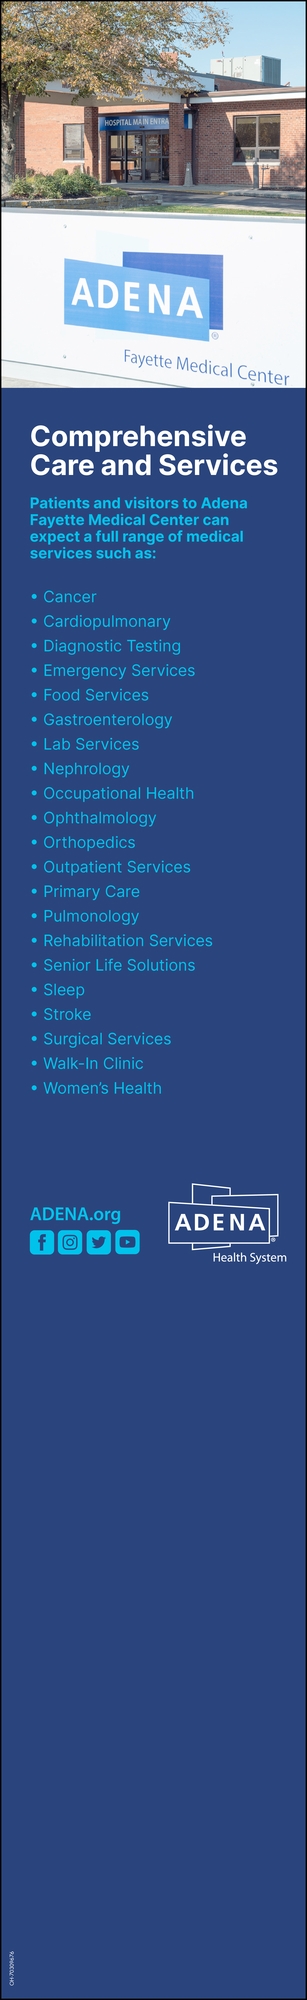 Comprehensive Care and Services